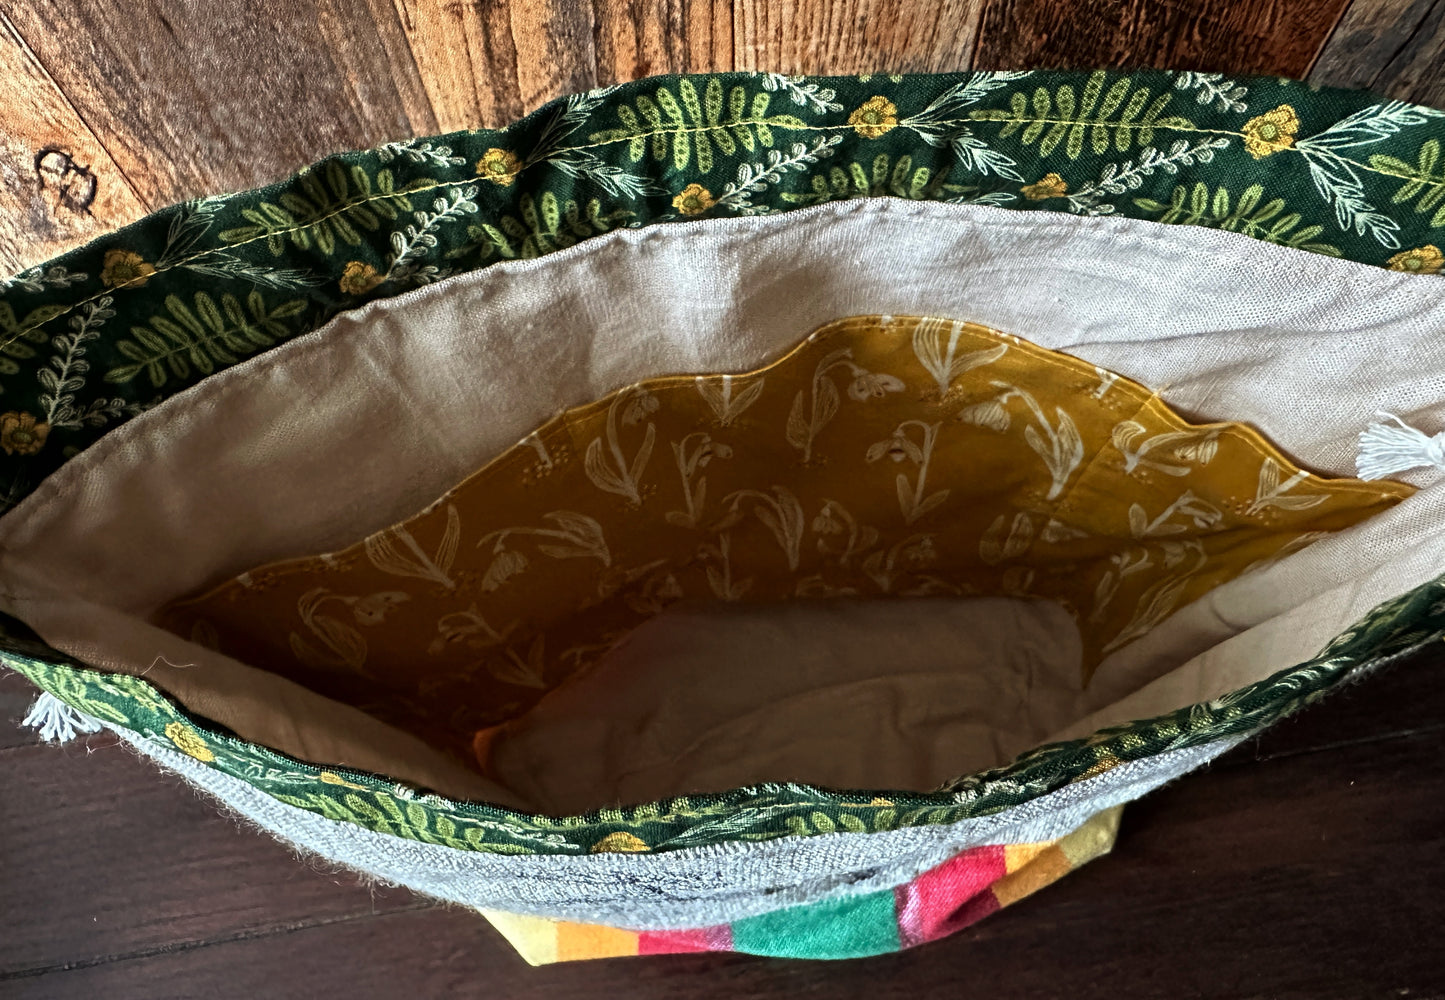 Deer in the Leaves Large Project Bag